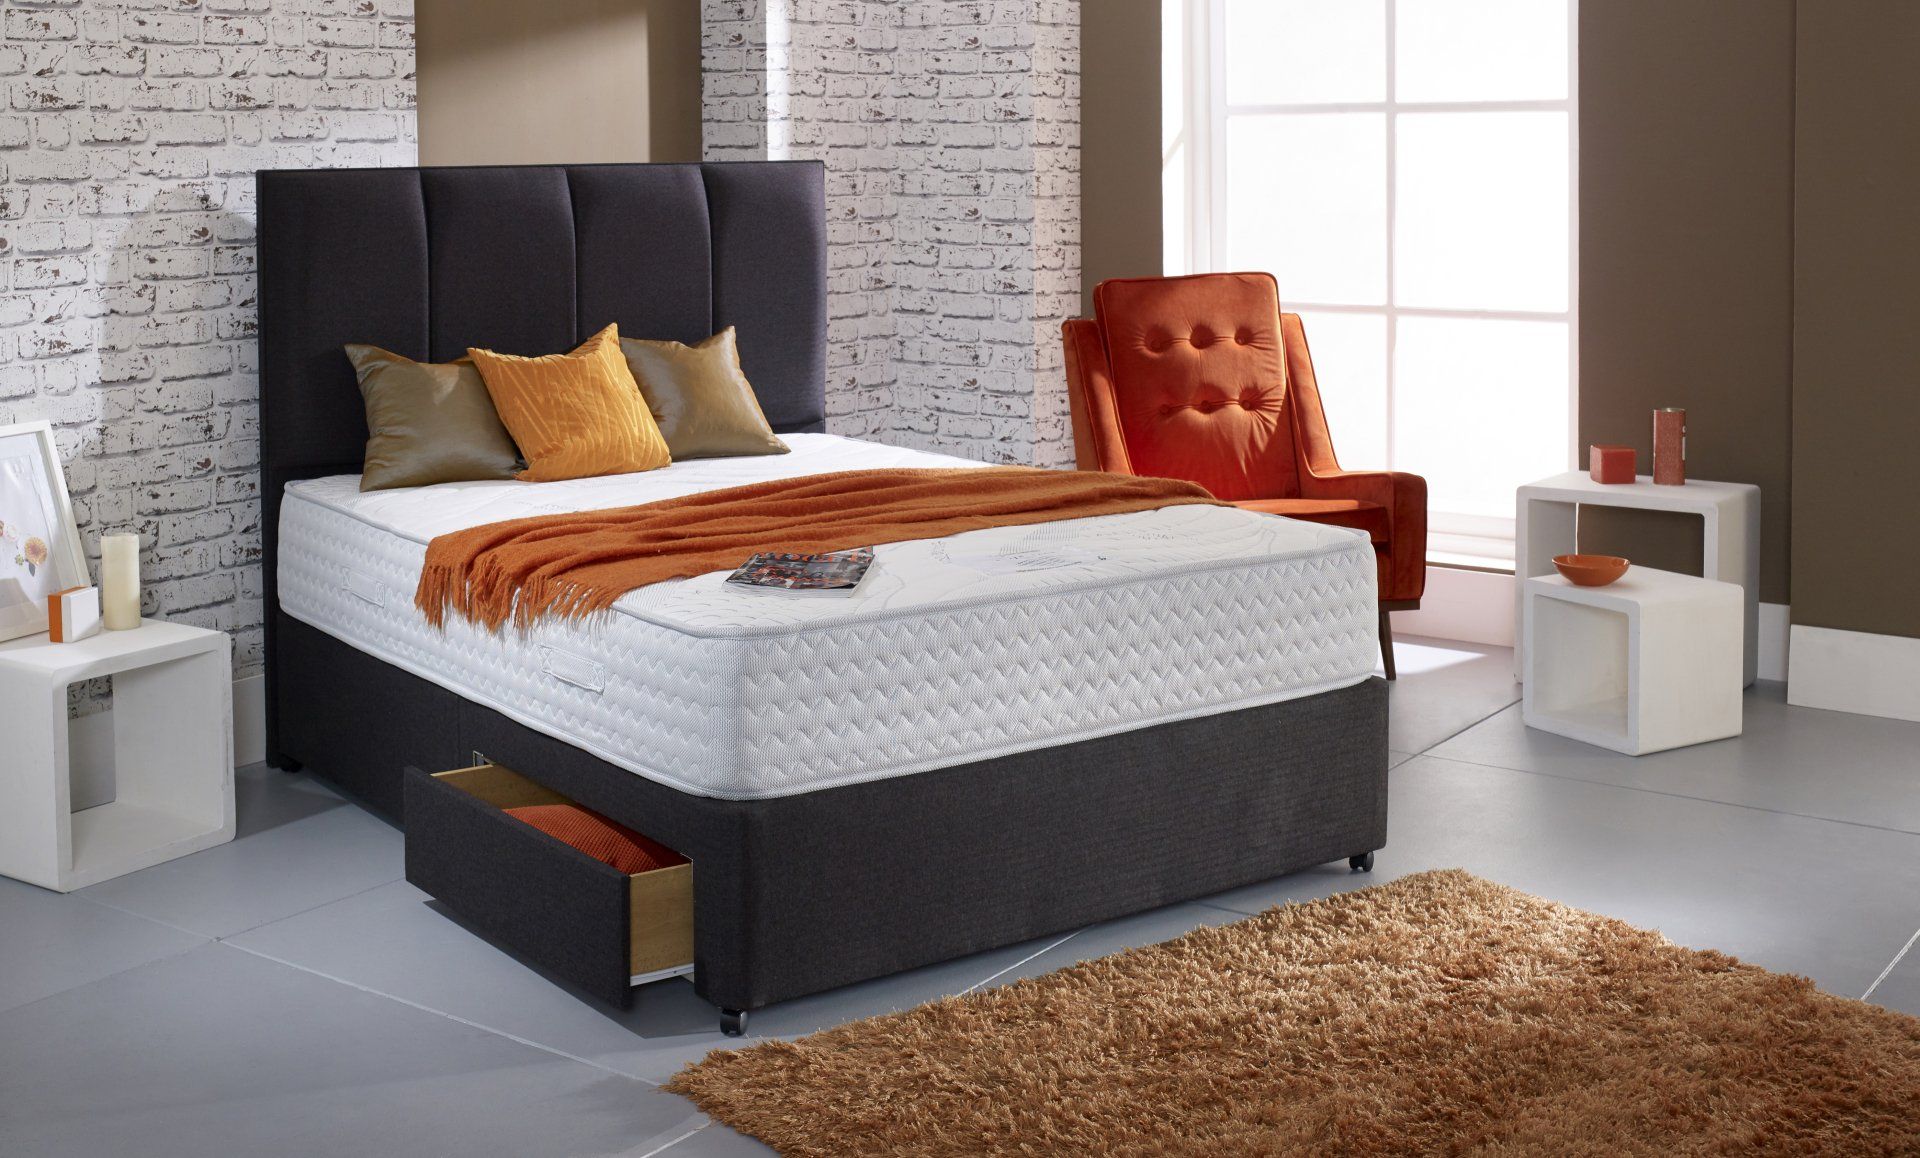 The Envirotech 1800 Eco-Friendly Mattress by Healthbeds